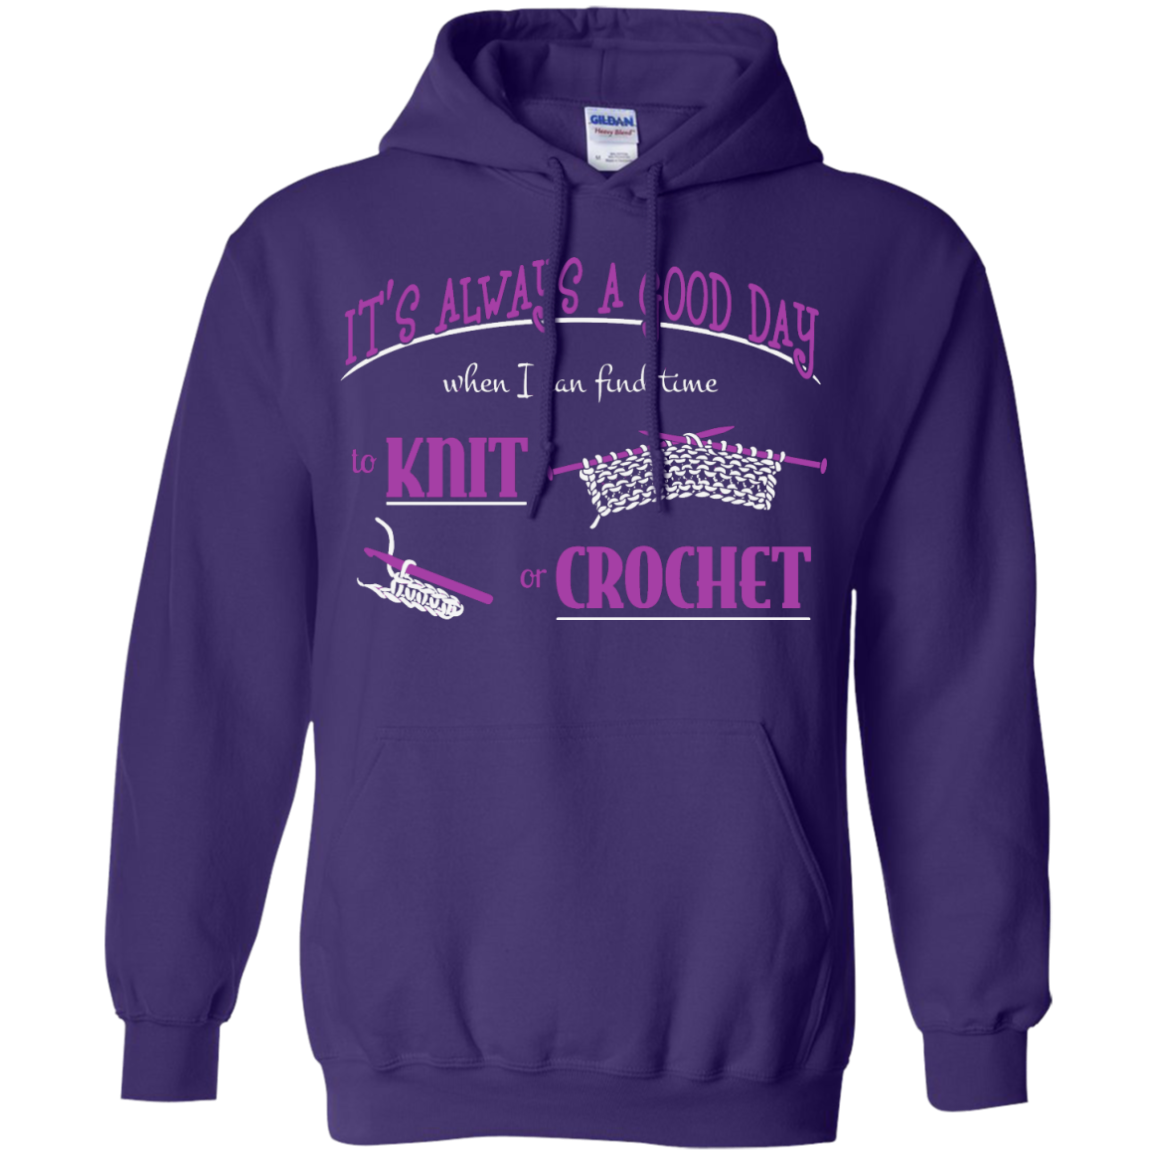 Good Day to Knit or Crochet Hoodies - Crafter4Life - 5